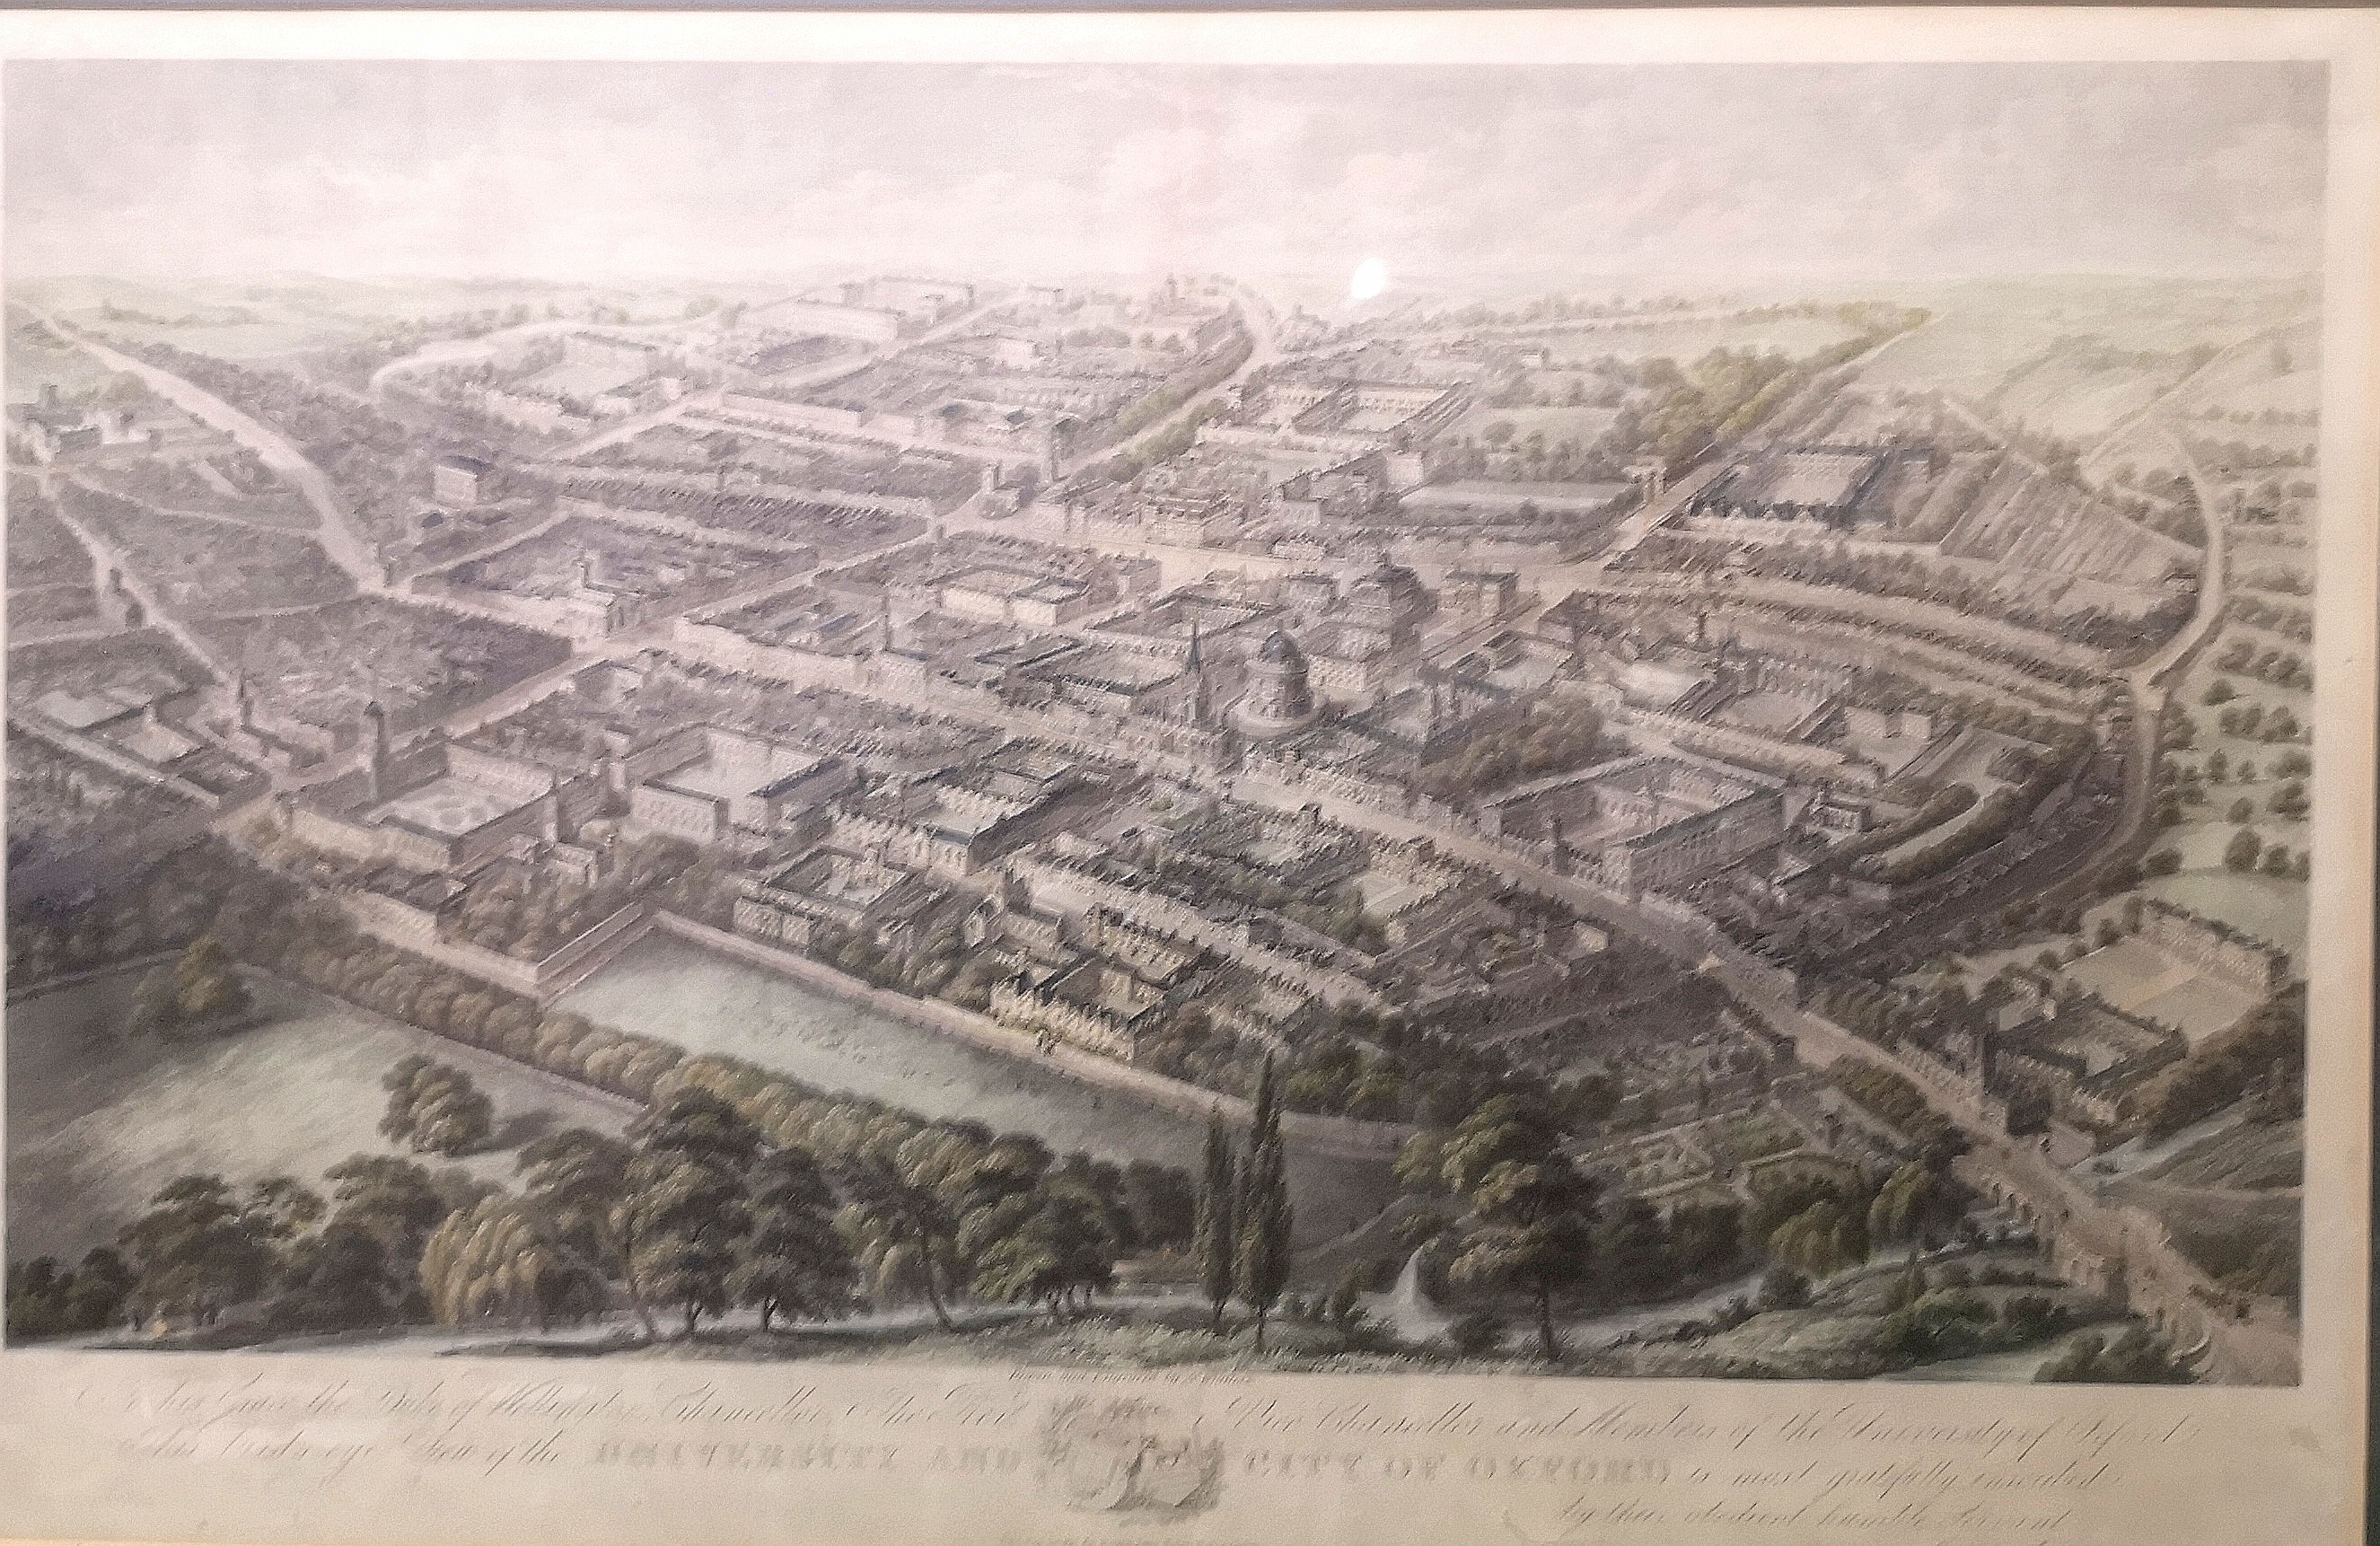 Framed and glazed print of the university city of Oxford - Image 2 of 3